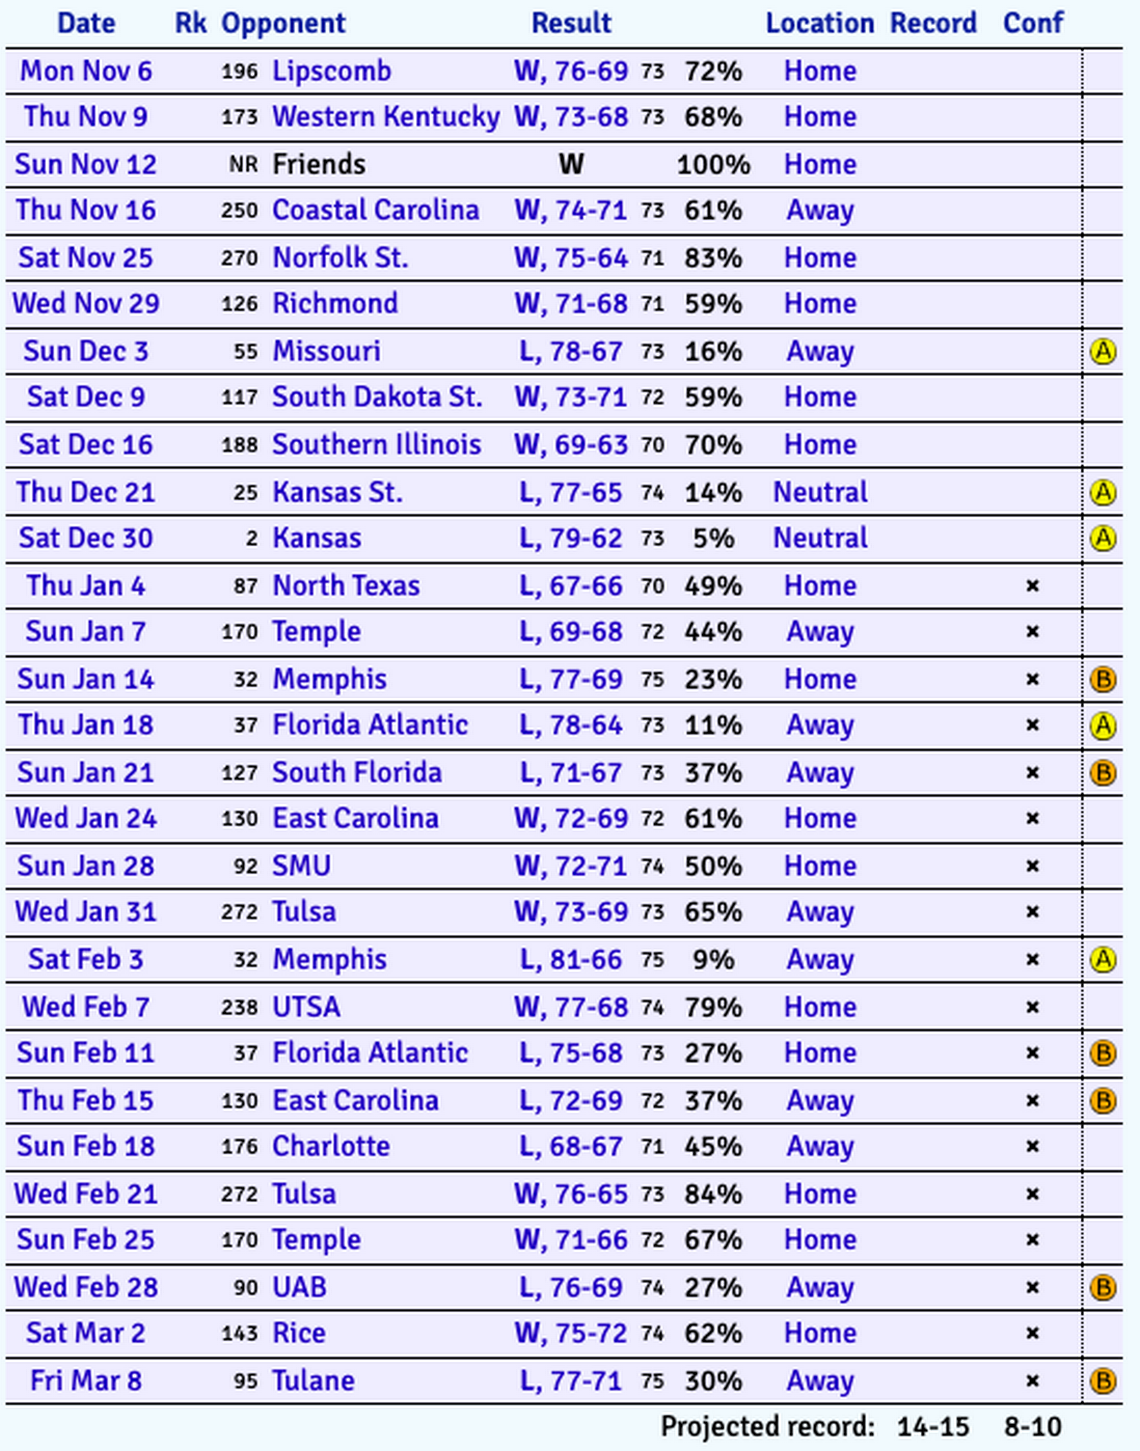 How KenPom’s initial rankings have the season projected for the Wichita State men’s basketball team.